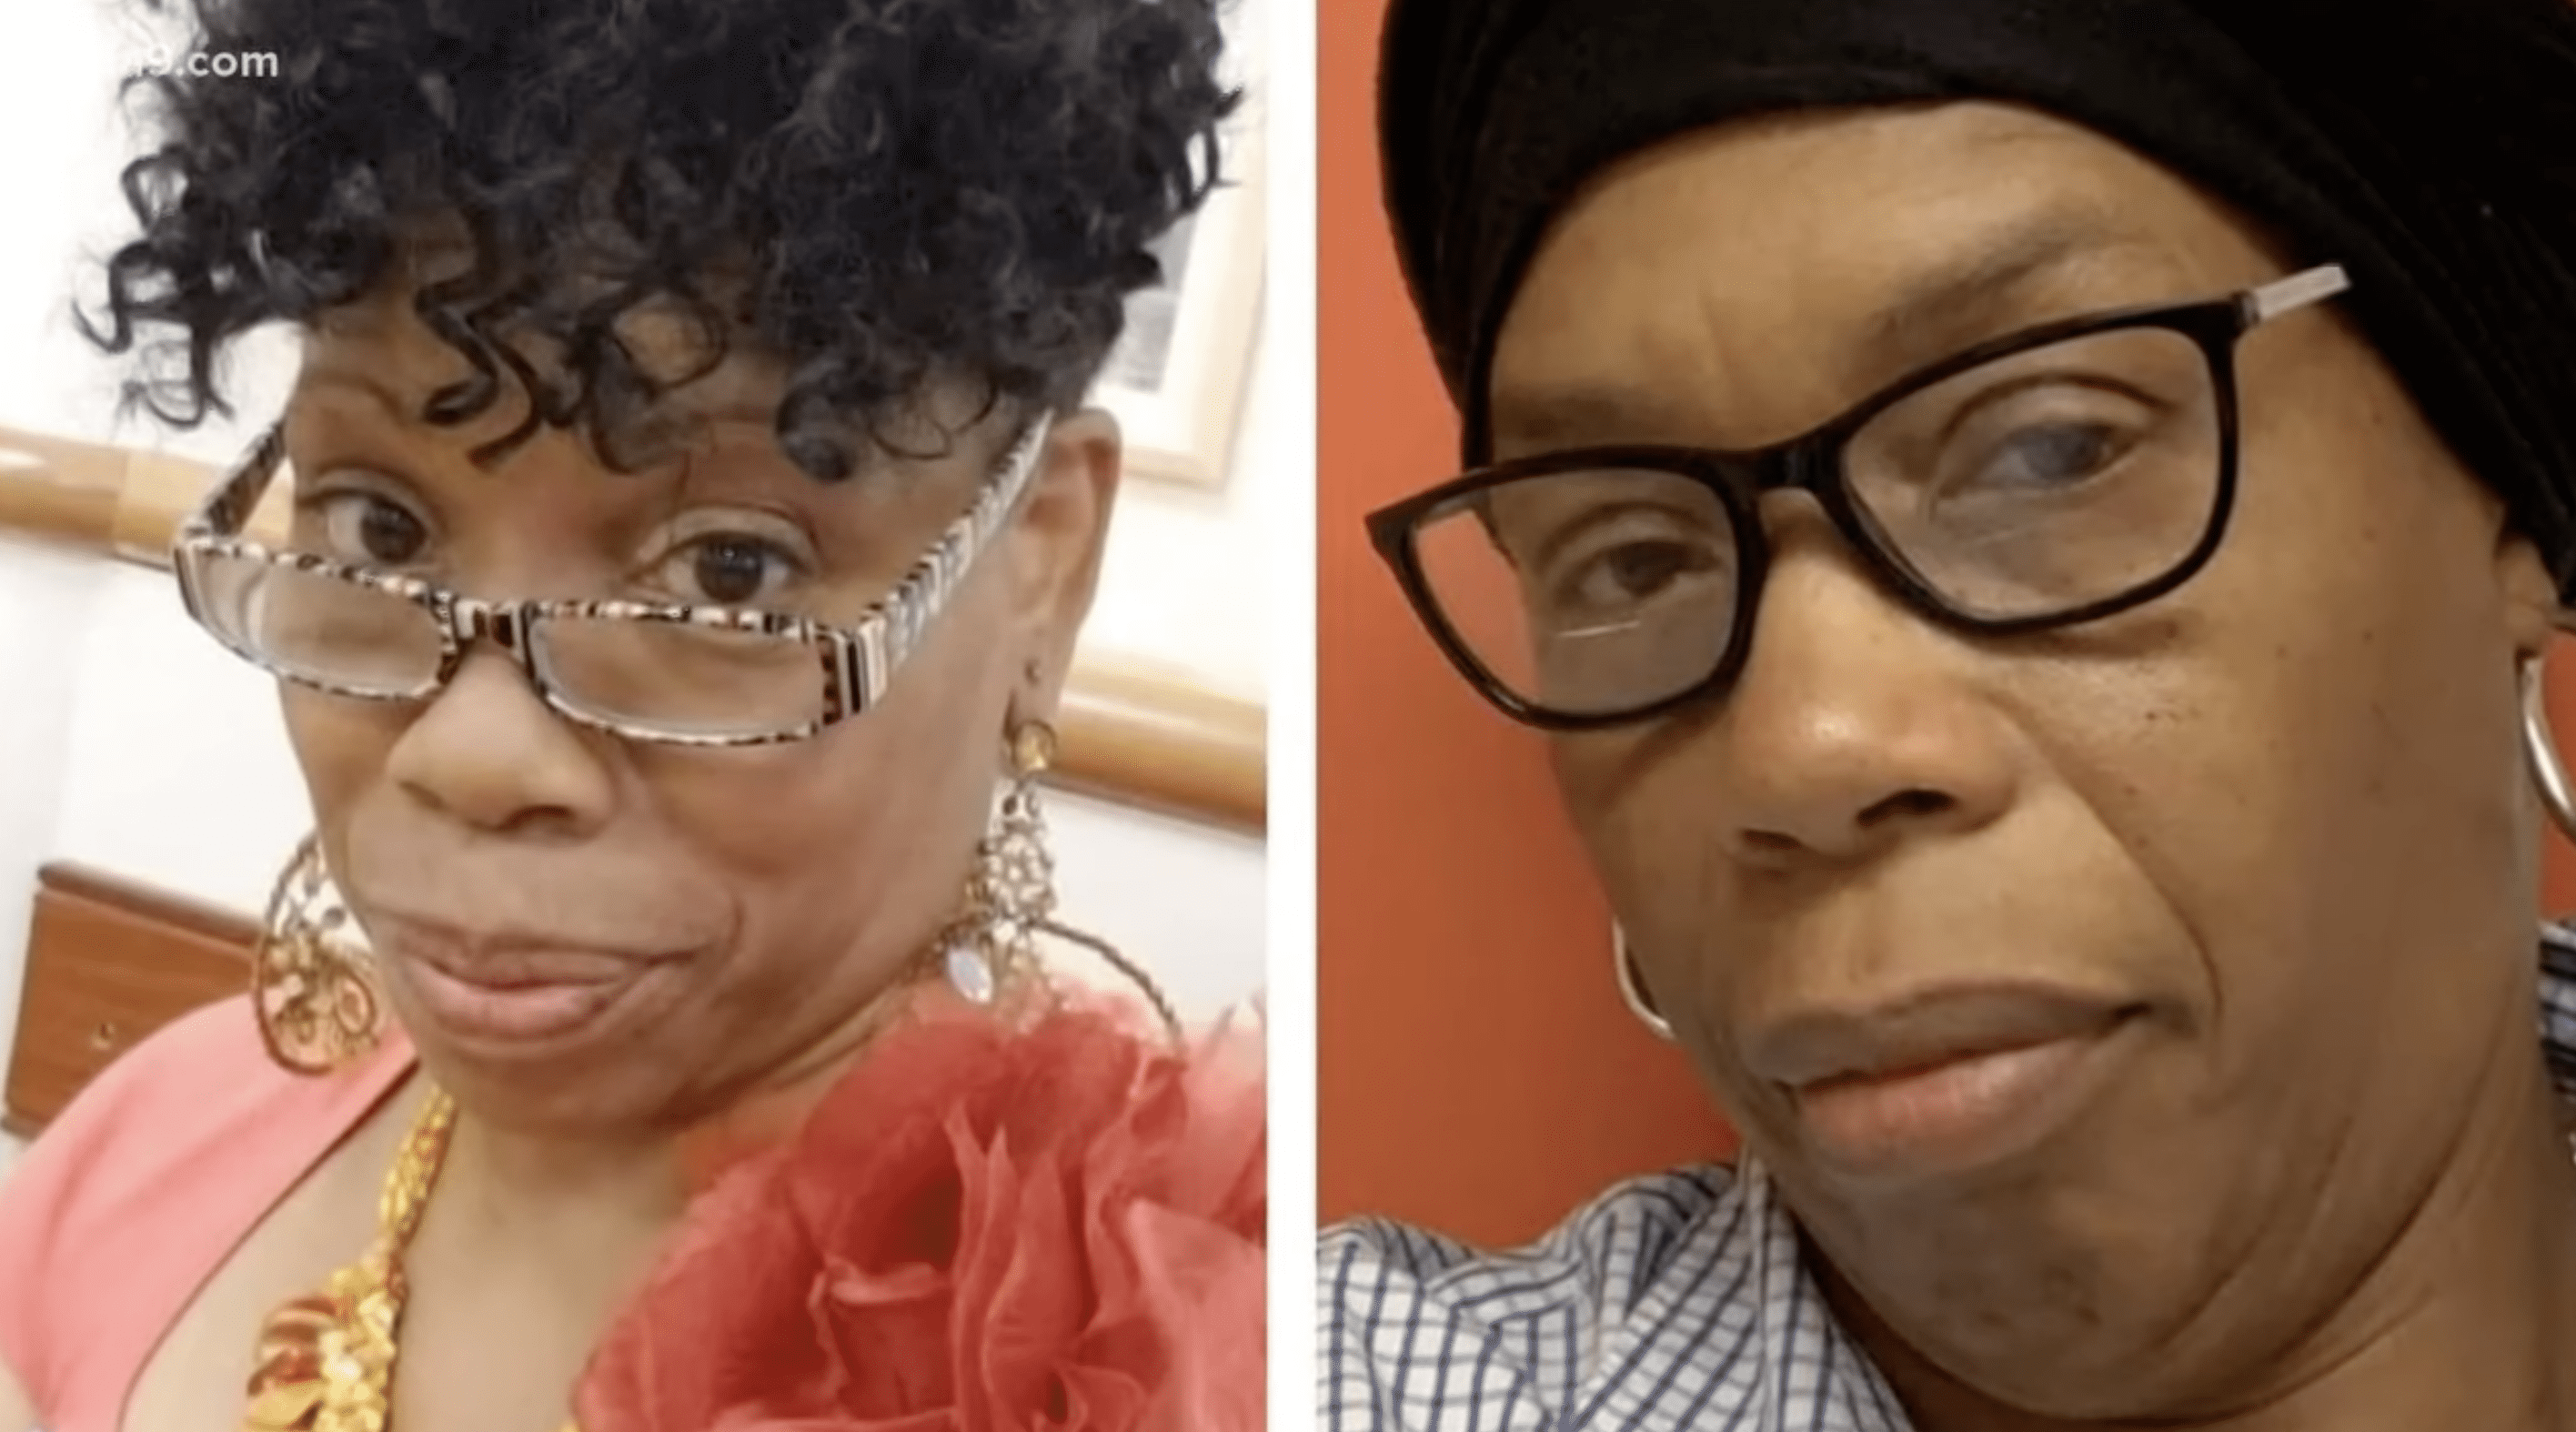 Smonique Smith-Person and her sister shared an uncanny resemblance. | Photo: YouTube.com/WUSA9